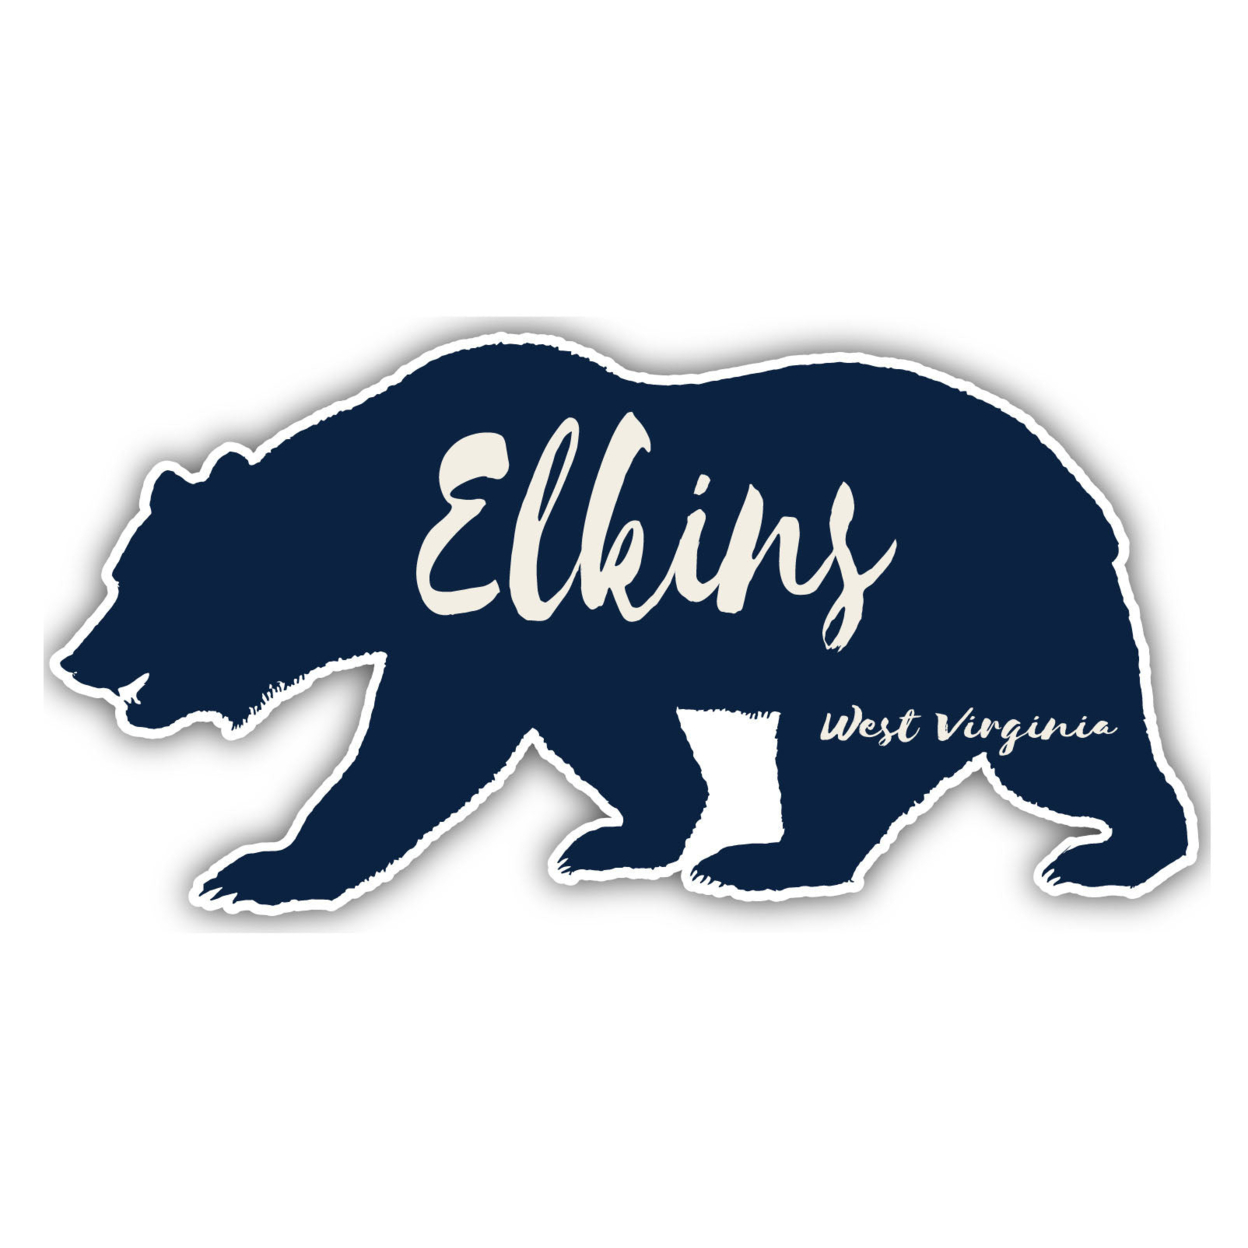 Elkins West Virginia Souvenir Decorative Stickers (Choose Theme And Size) - 4-Pack, 10-Inch, Bear